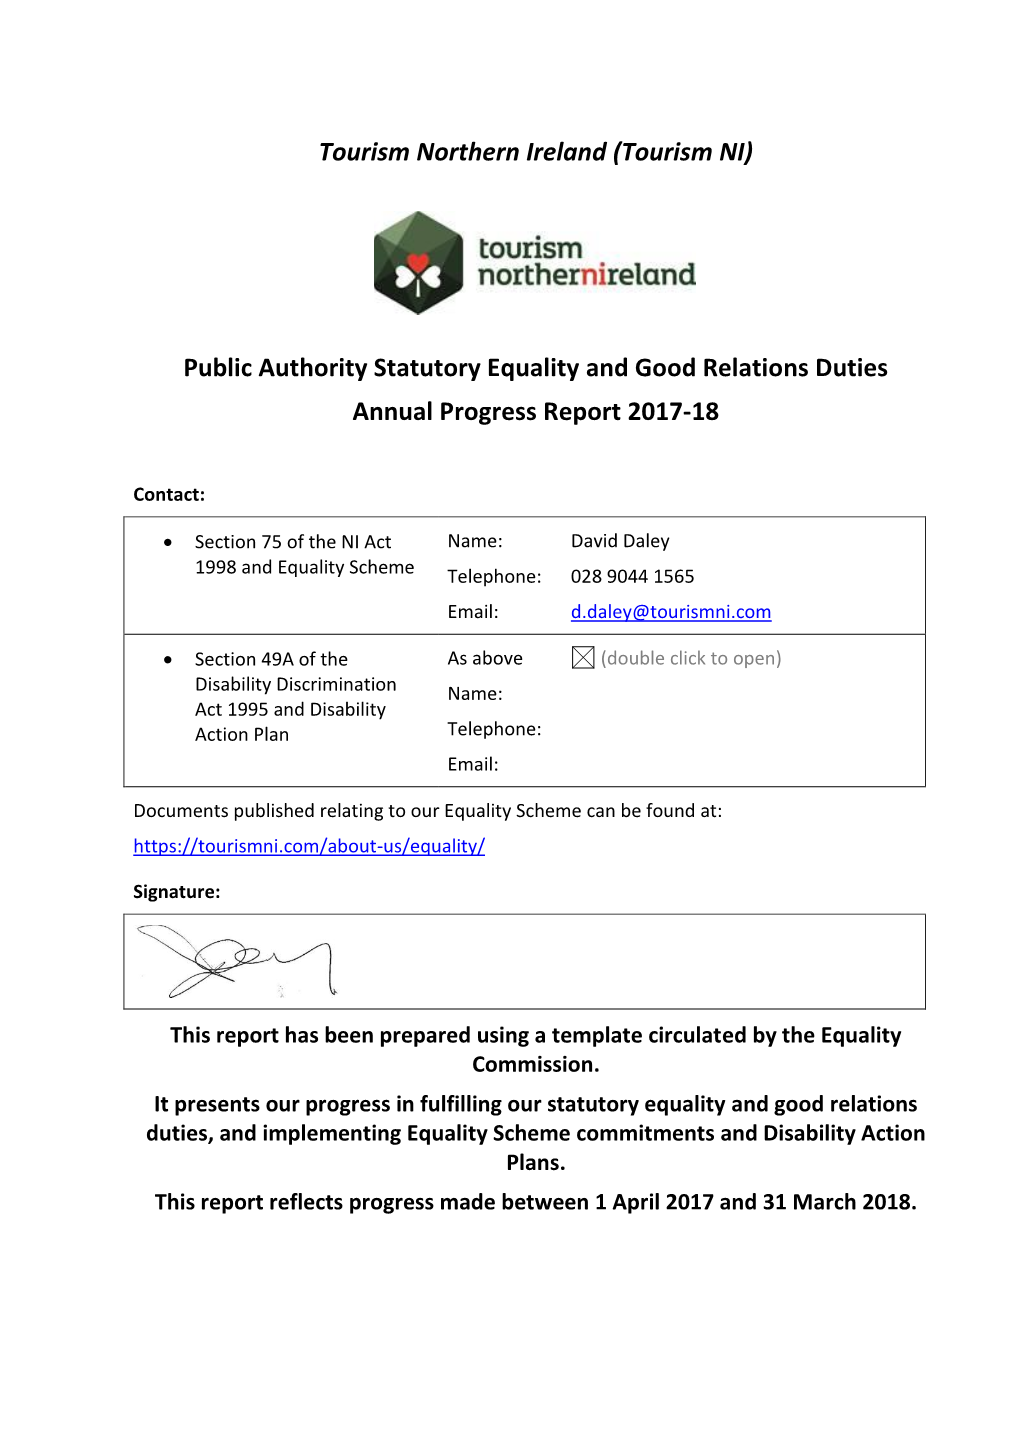 Public Authority Statutory Equality and Good Relations Duties Annual Progress Report 2017-18